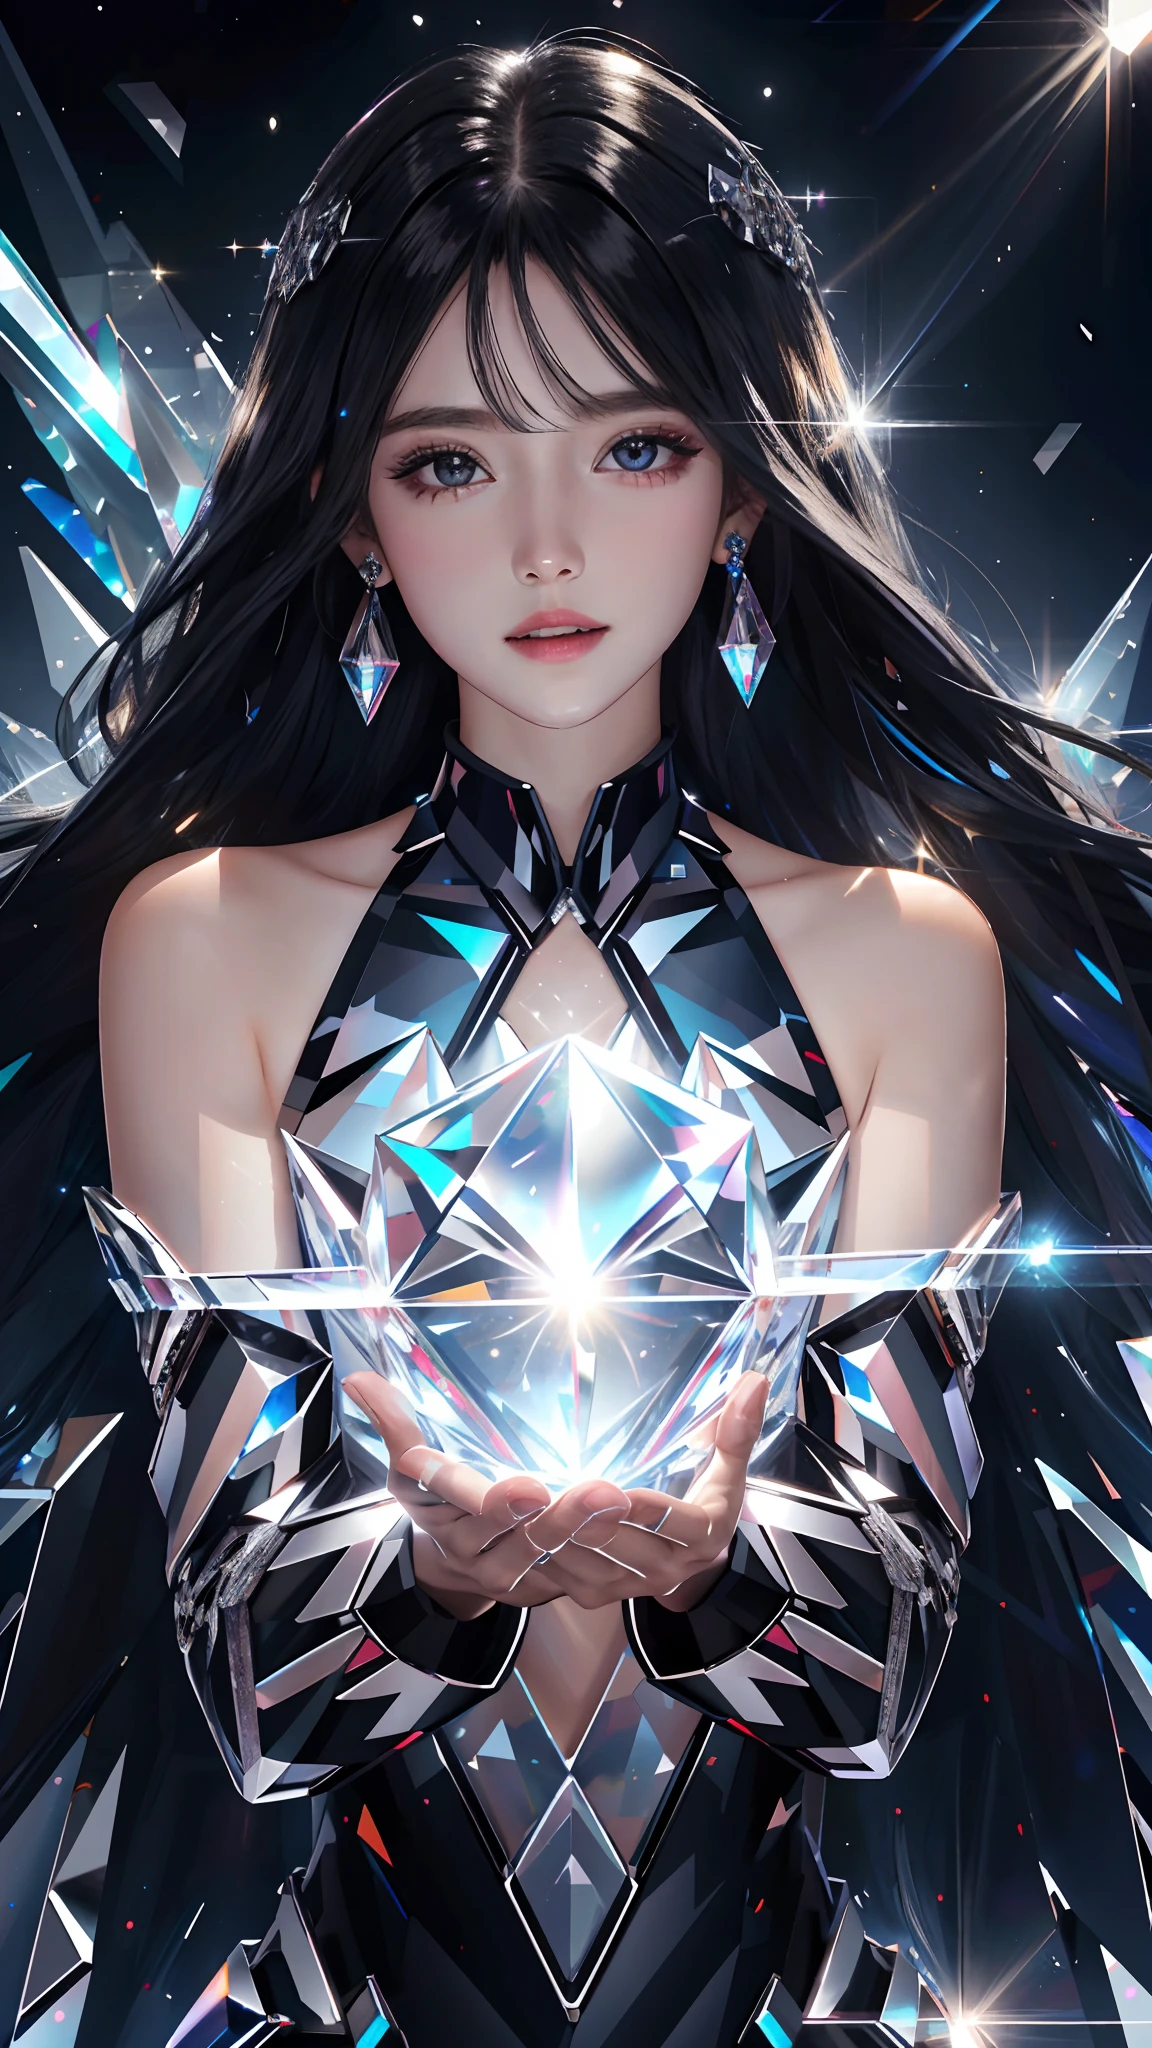 Ultra hd, 8k quality, a girl, happy, very long hair, detailed eyes, glossy lips, black Crystalline dress, black crystals, hair crystal, reflecting blue, lights on crystals, spreading lights, neon effects, fantastic pose, whole body capture,